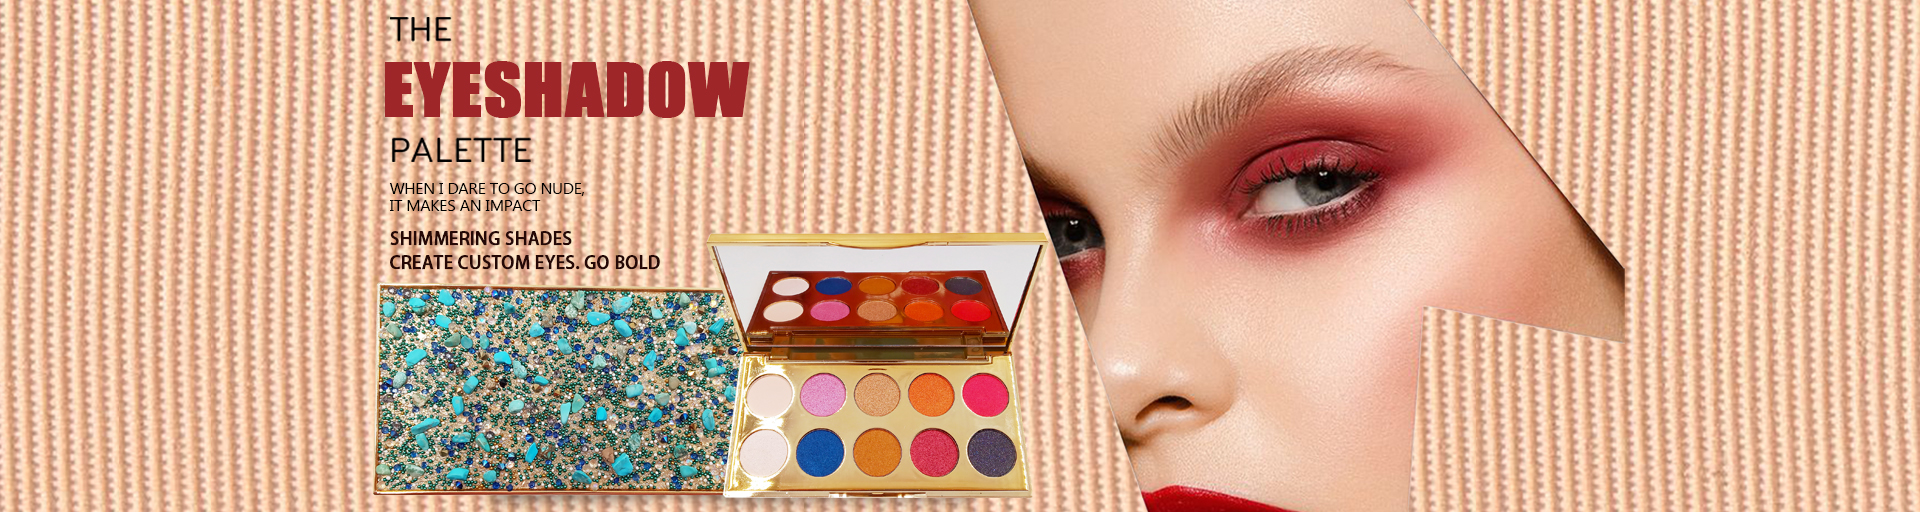 JIND new products eyeshadow palette